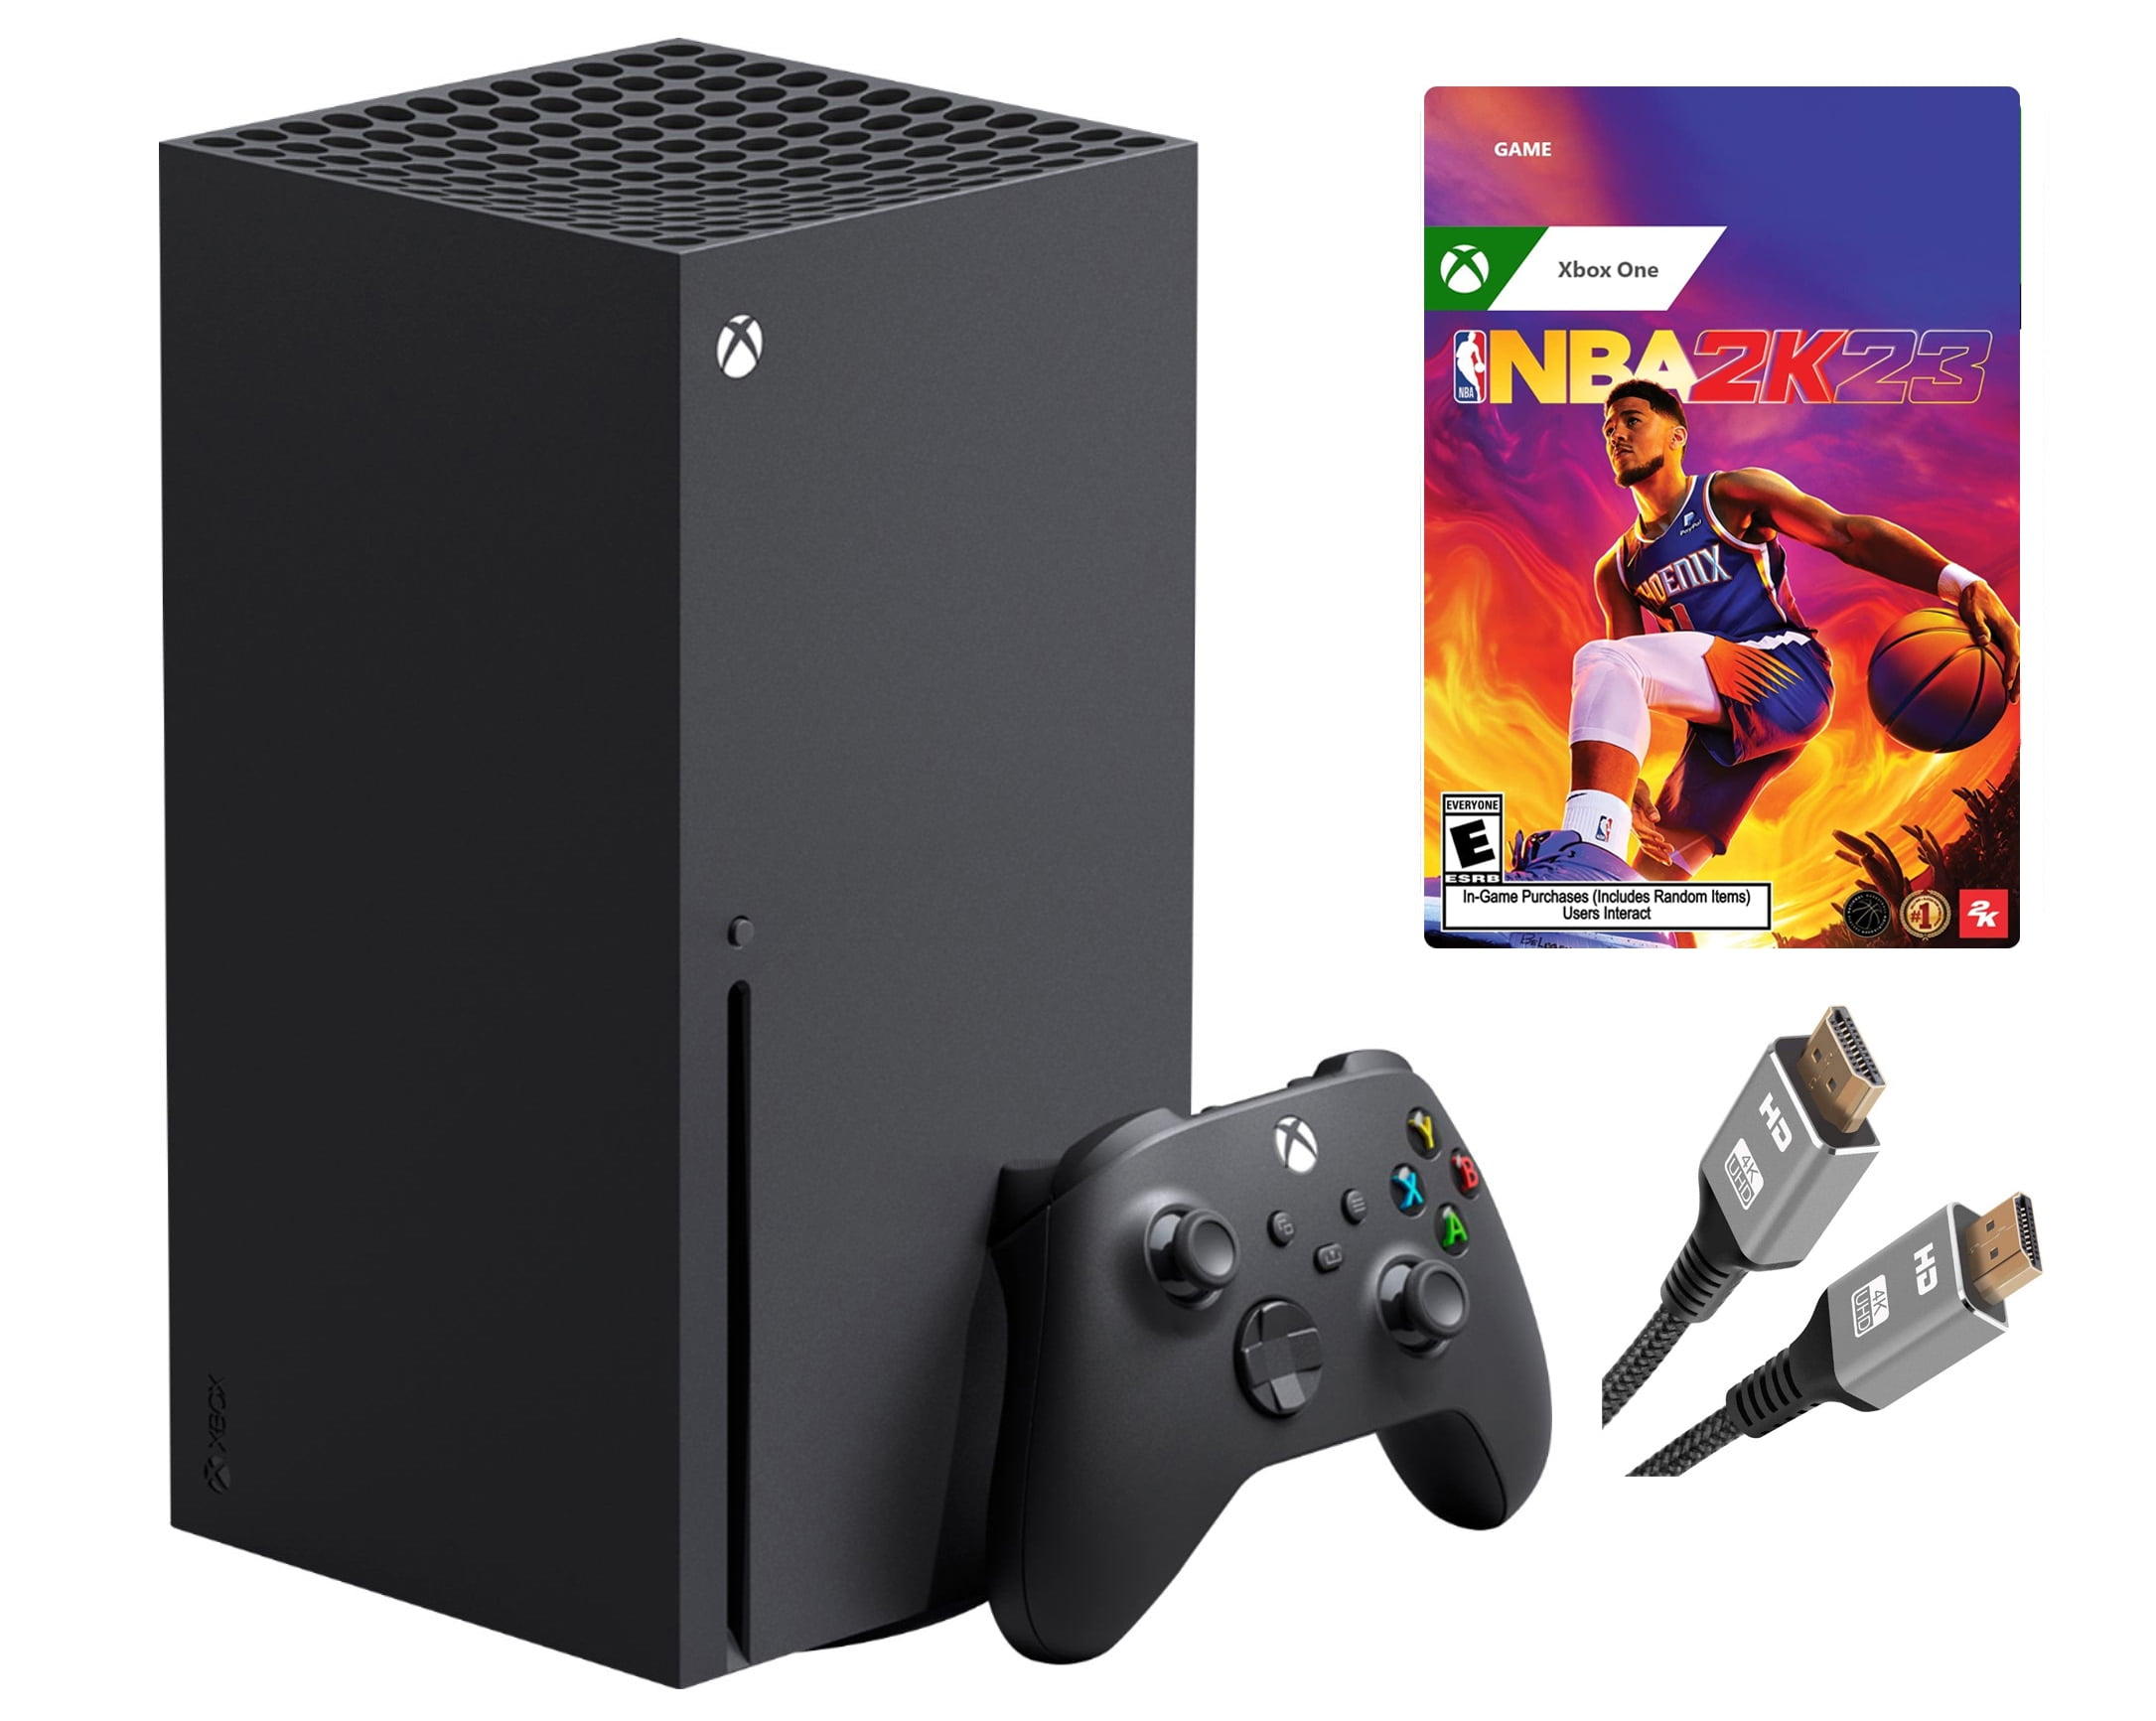 Newest Microsoft Xbox Series X–Gaming Console System- 1TB SSD Black X  Version with Disc Drive Bundle with Need for Speed Payback Full Game and  MTC11 